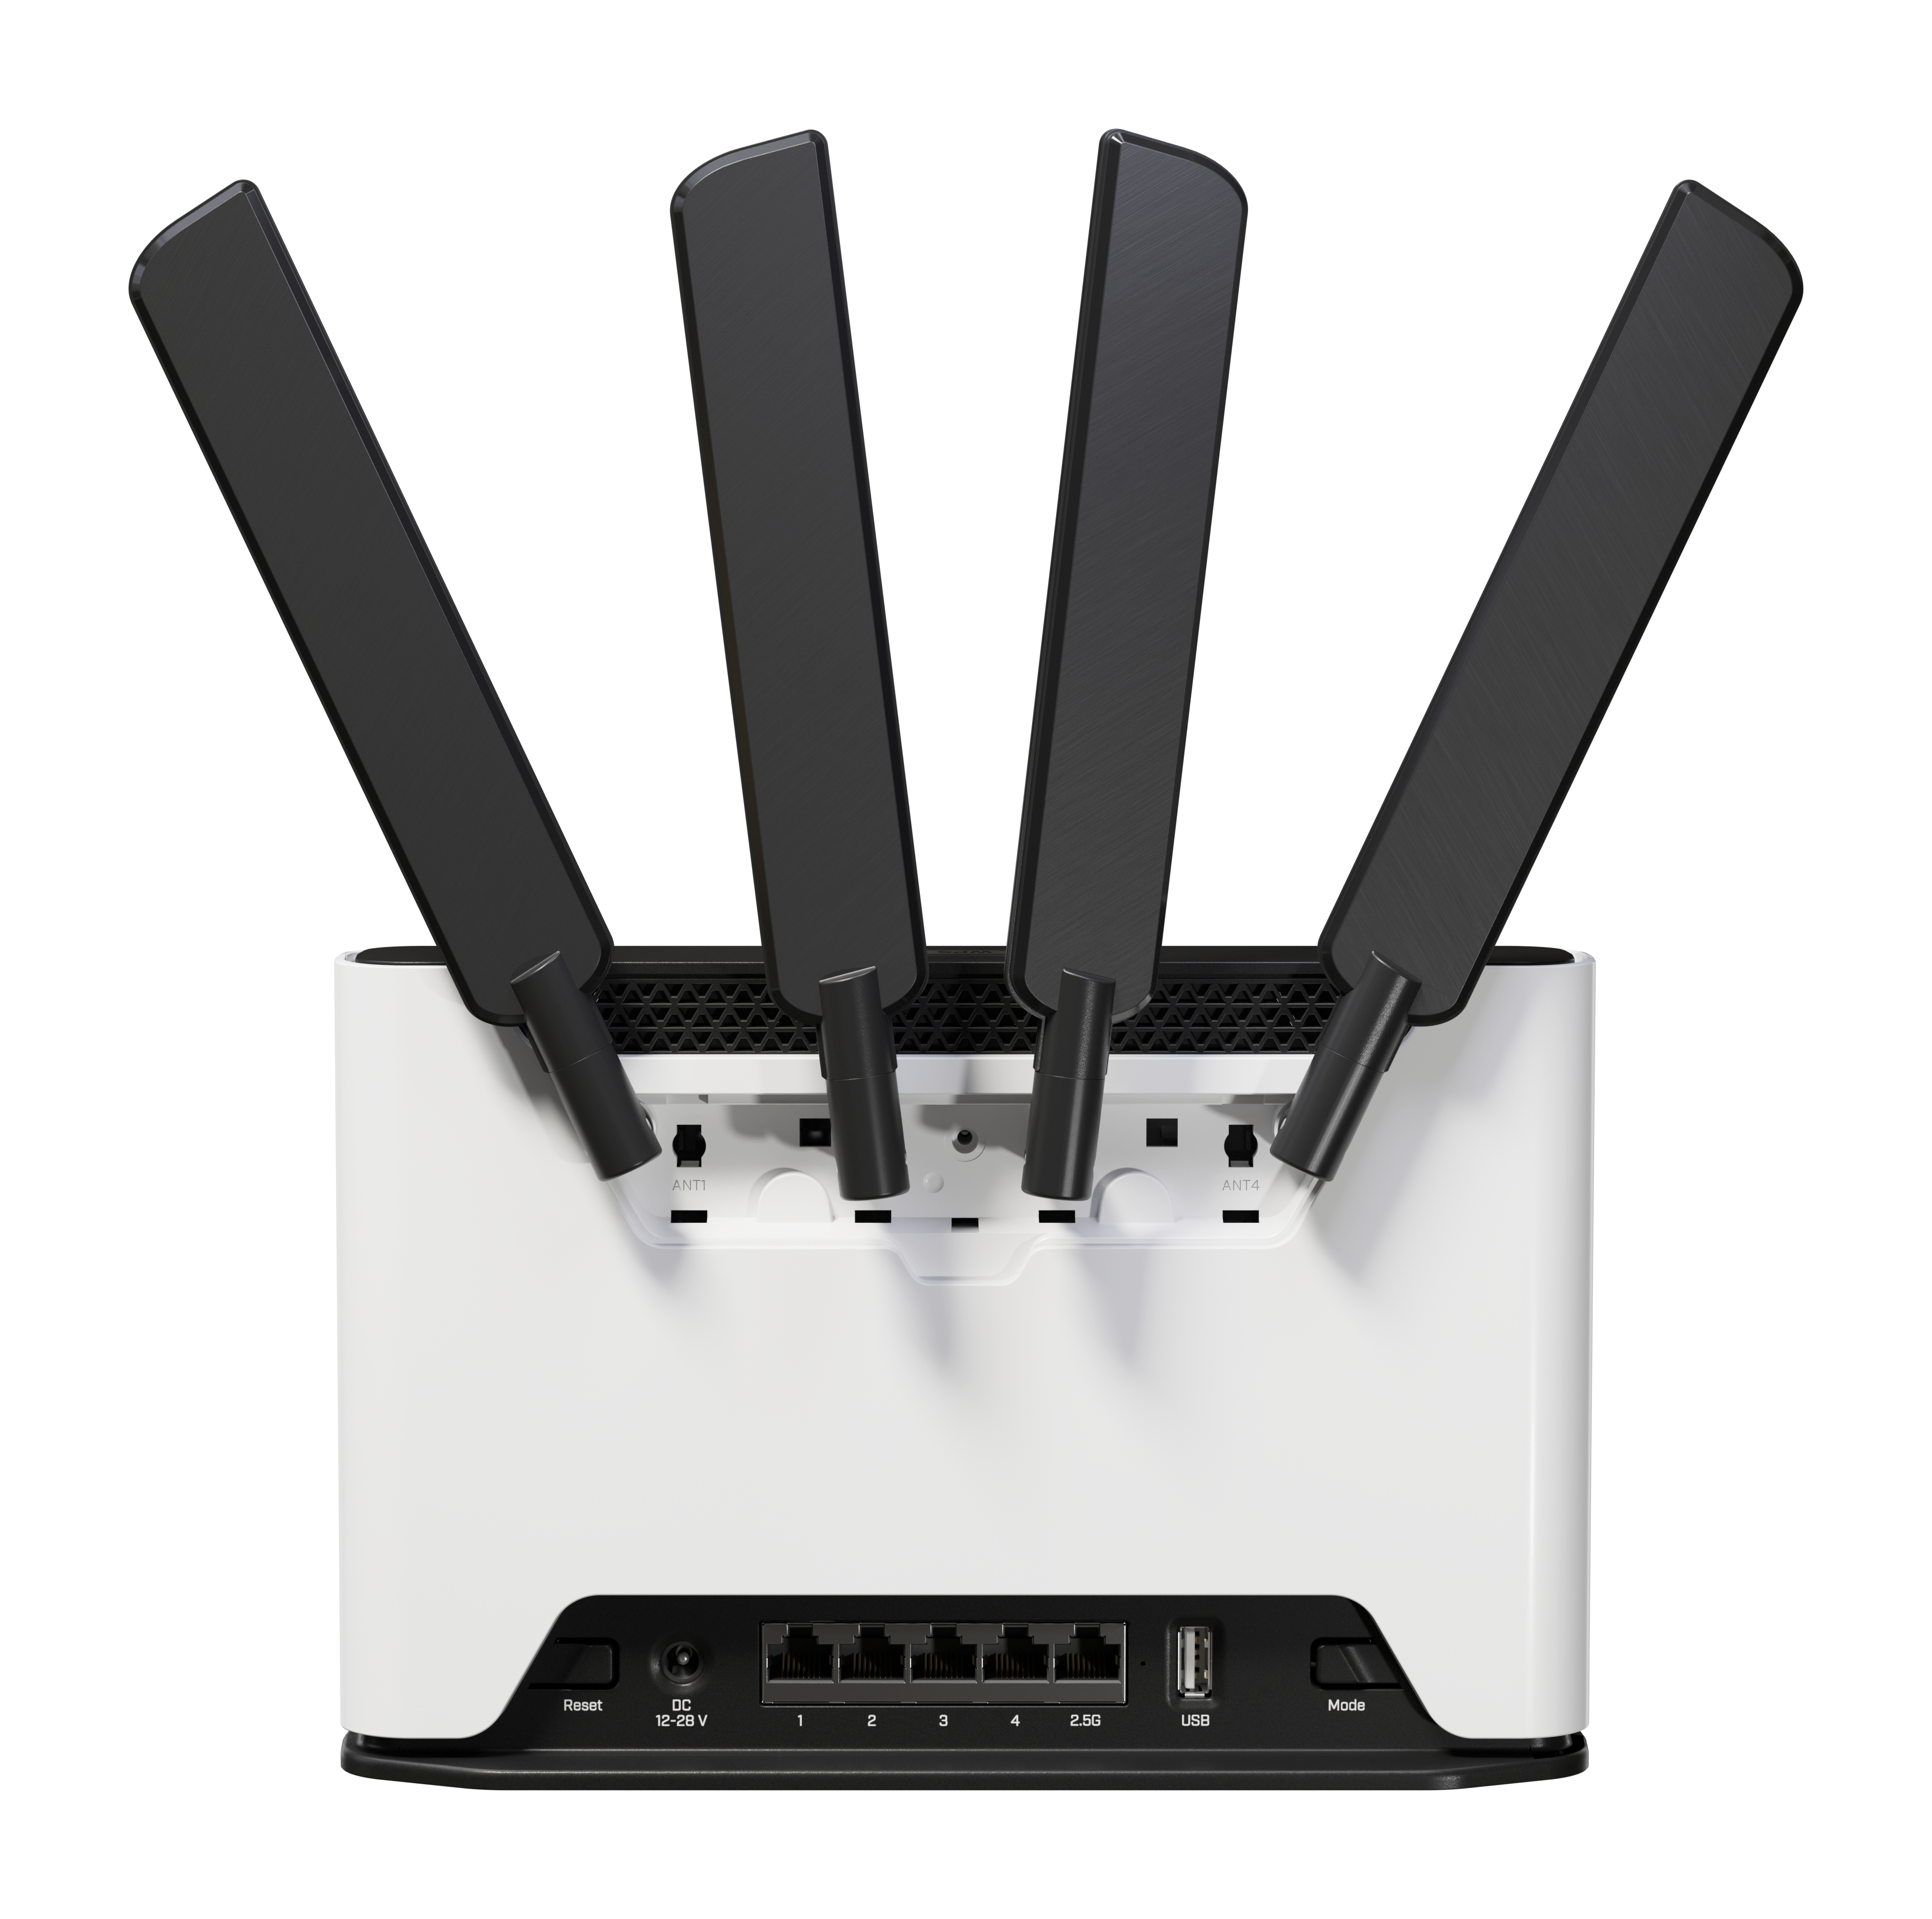 Router 5G